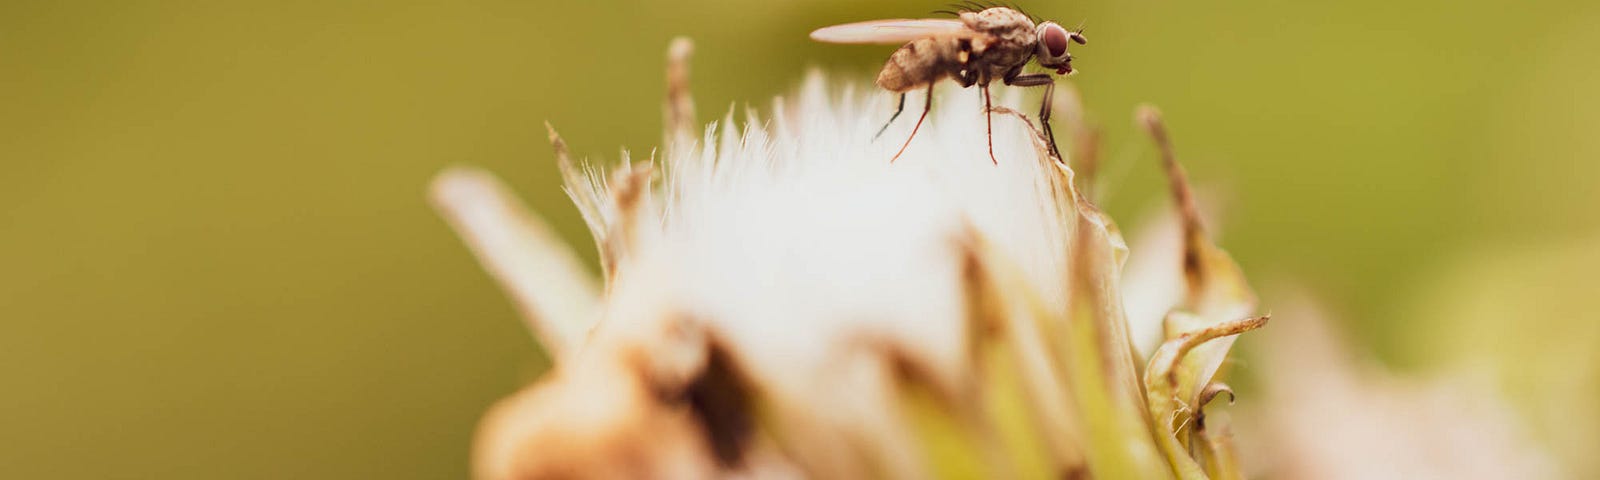 Macro imae of a fly on a white fluffy plant, the background blurry.